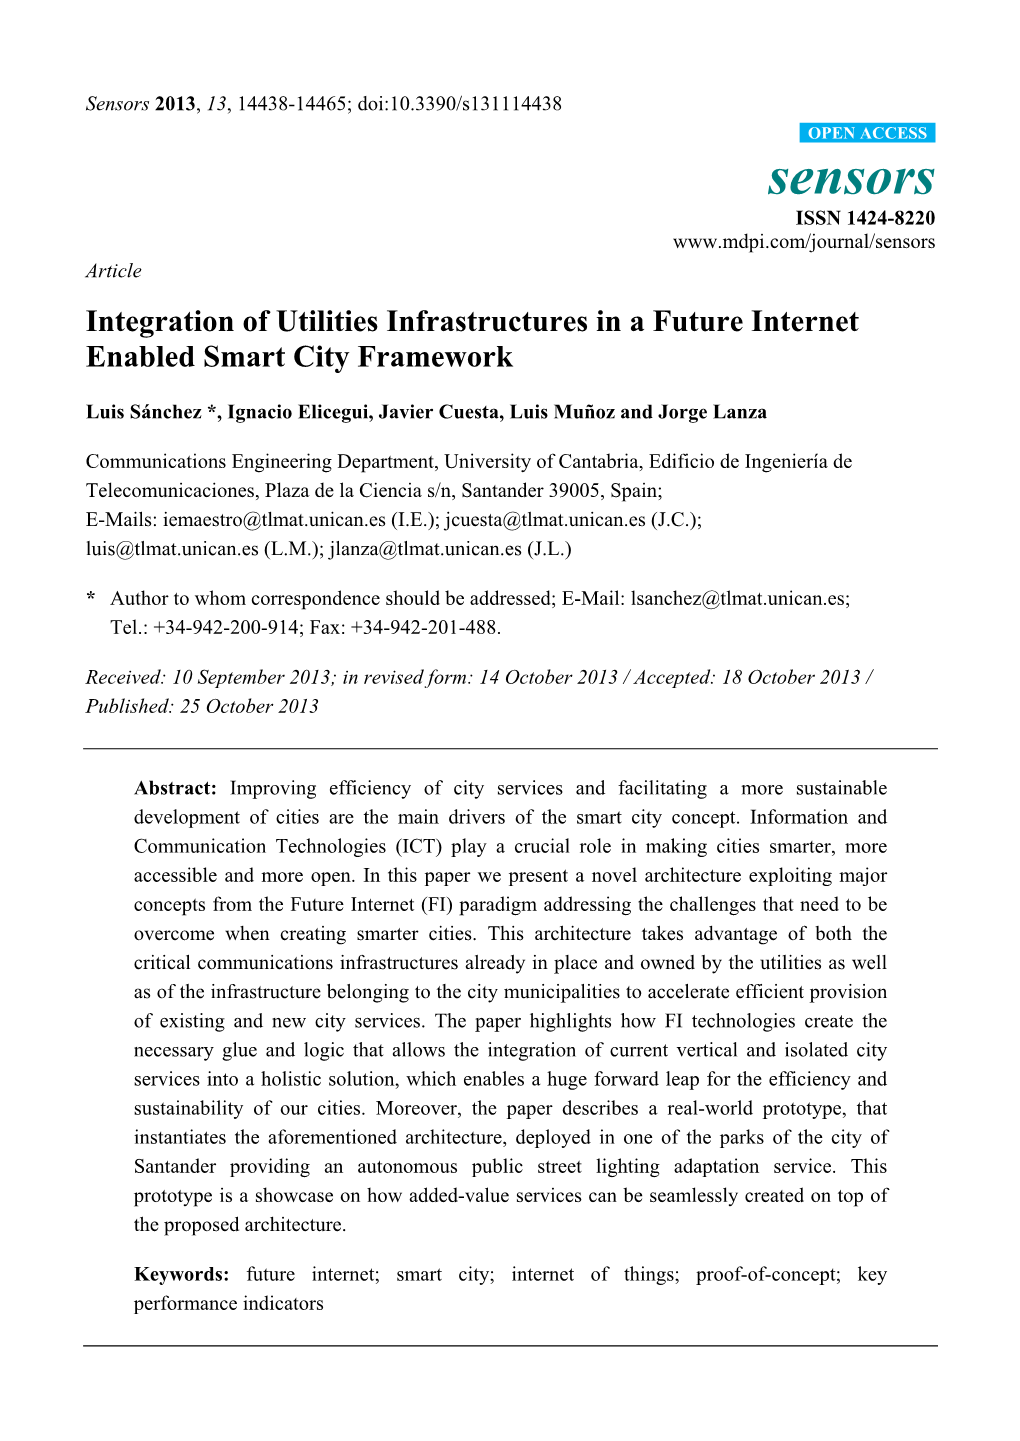 Integration of Utilities Infrastructures in a Future Internet Enabled Smart City Framework